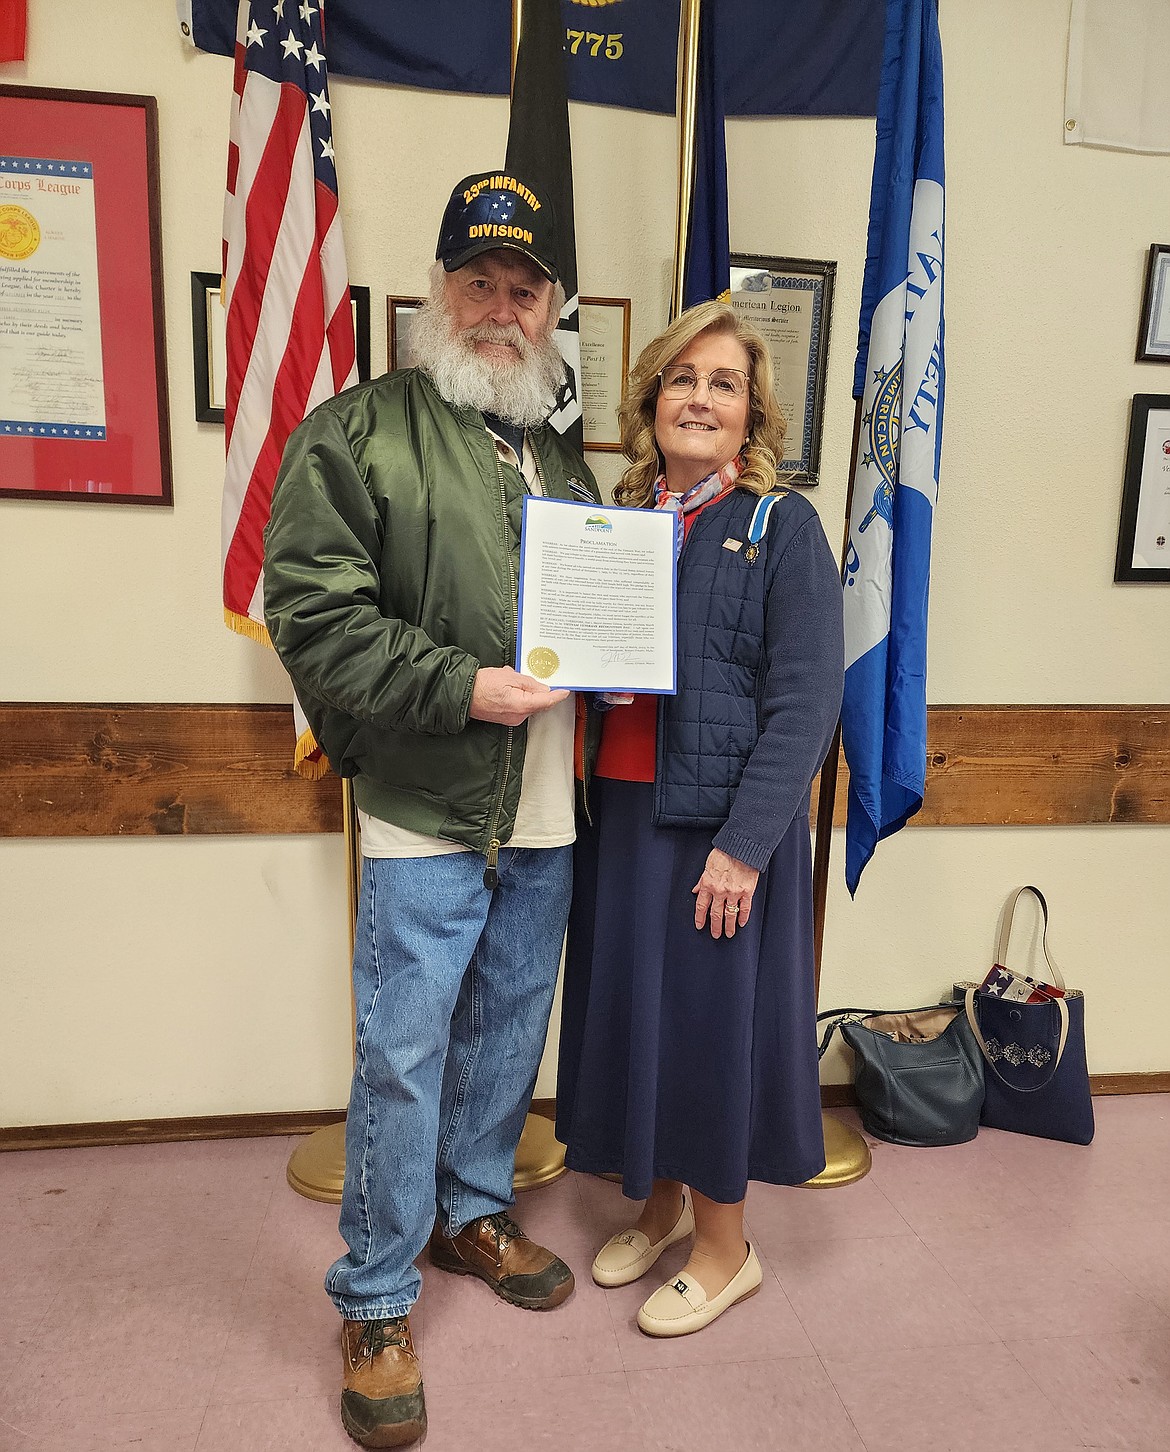 Jeff Dunnum, president of Vietnam Veterans Chapter 890 in Sandpoint, accepts a proclamation from the city of Sandpoint honor local Vietnam veterans from Susan Costa, regent of the Wild Horse Trail Chapter. DAR members recently held a luncheon to honor local veterans.